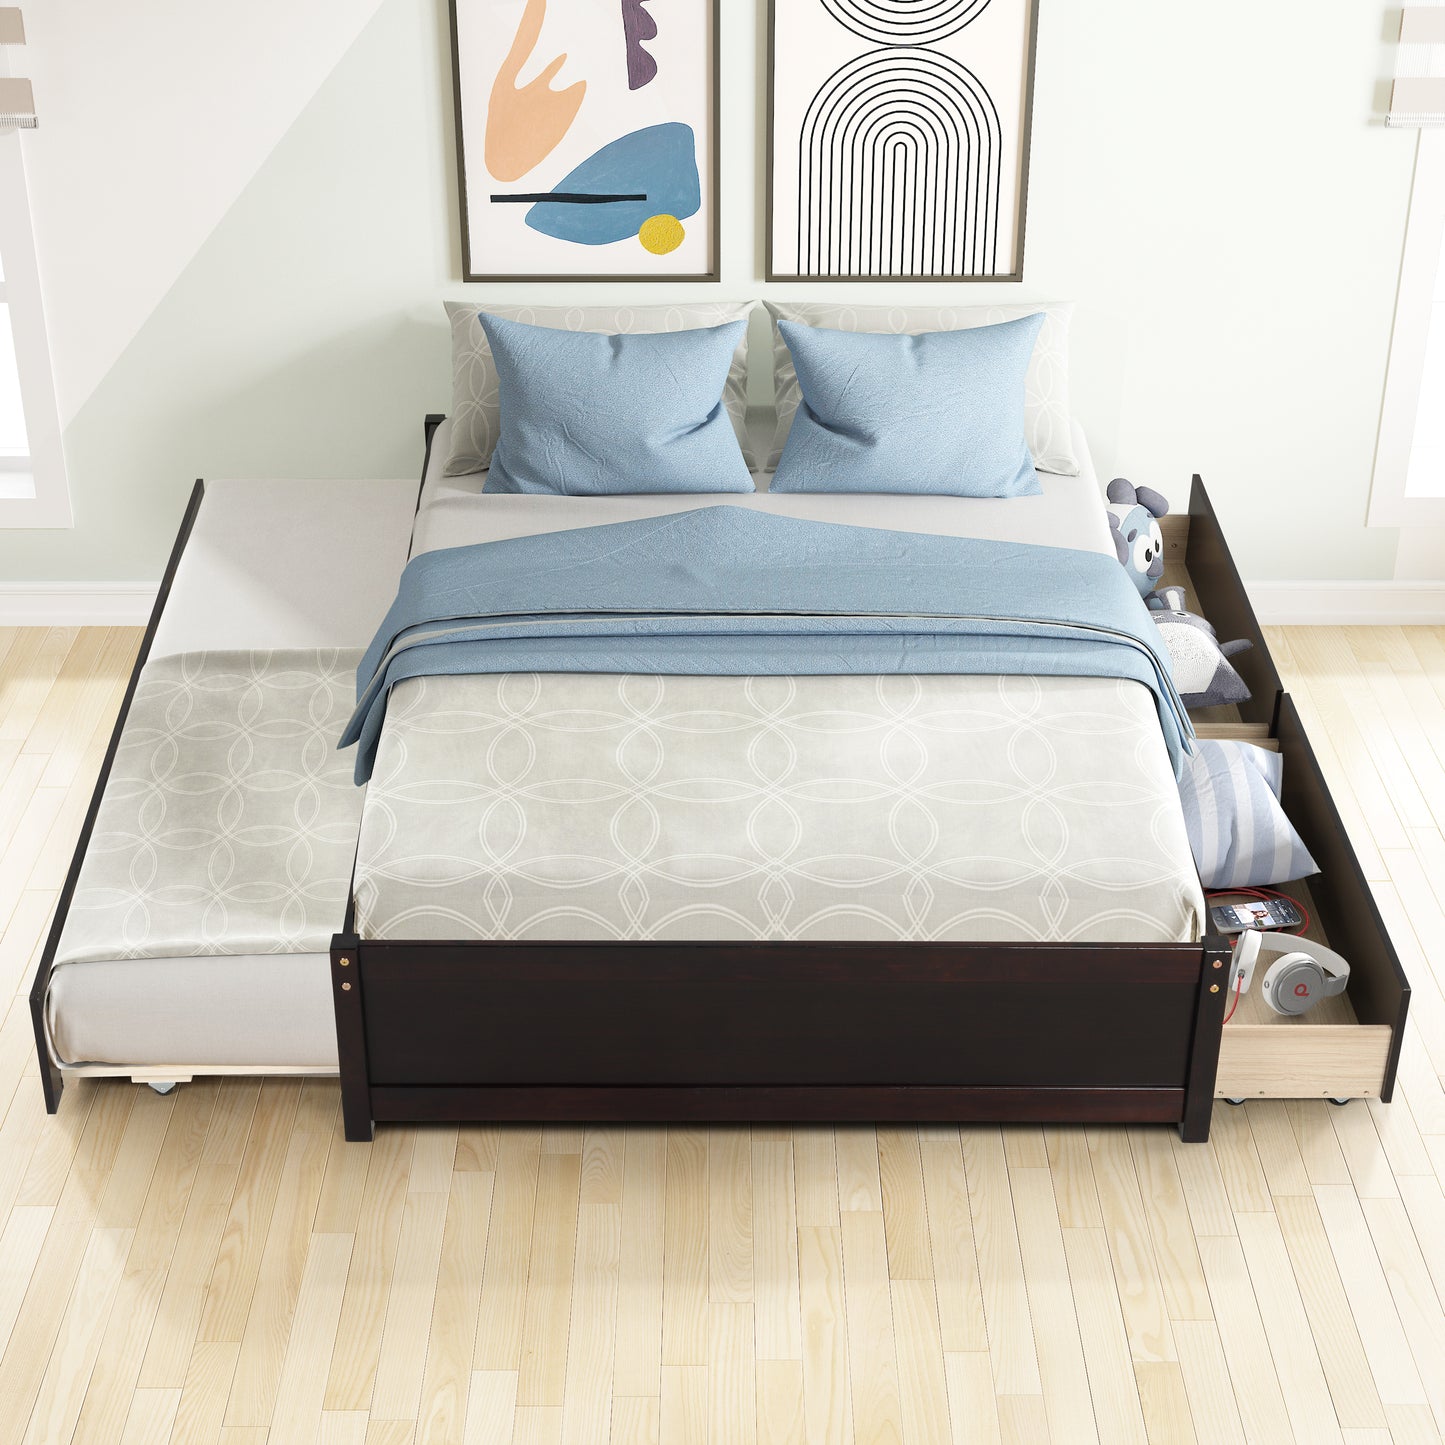 FULL PLATFORM BED WITH TWIN SIZE TRUNDLE AND TWO DRAWERS - ESPRESSO